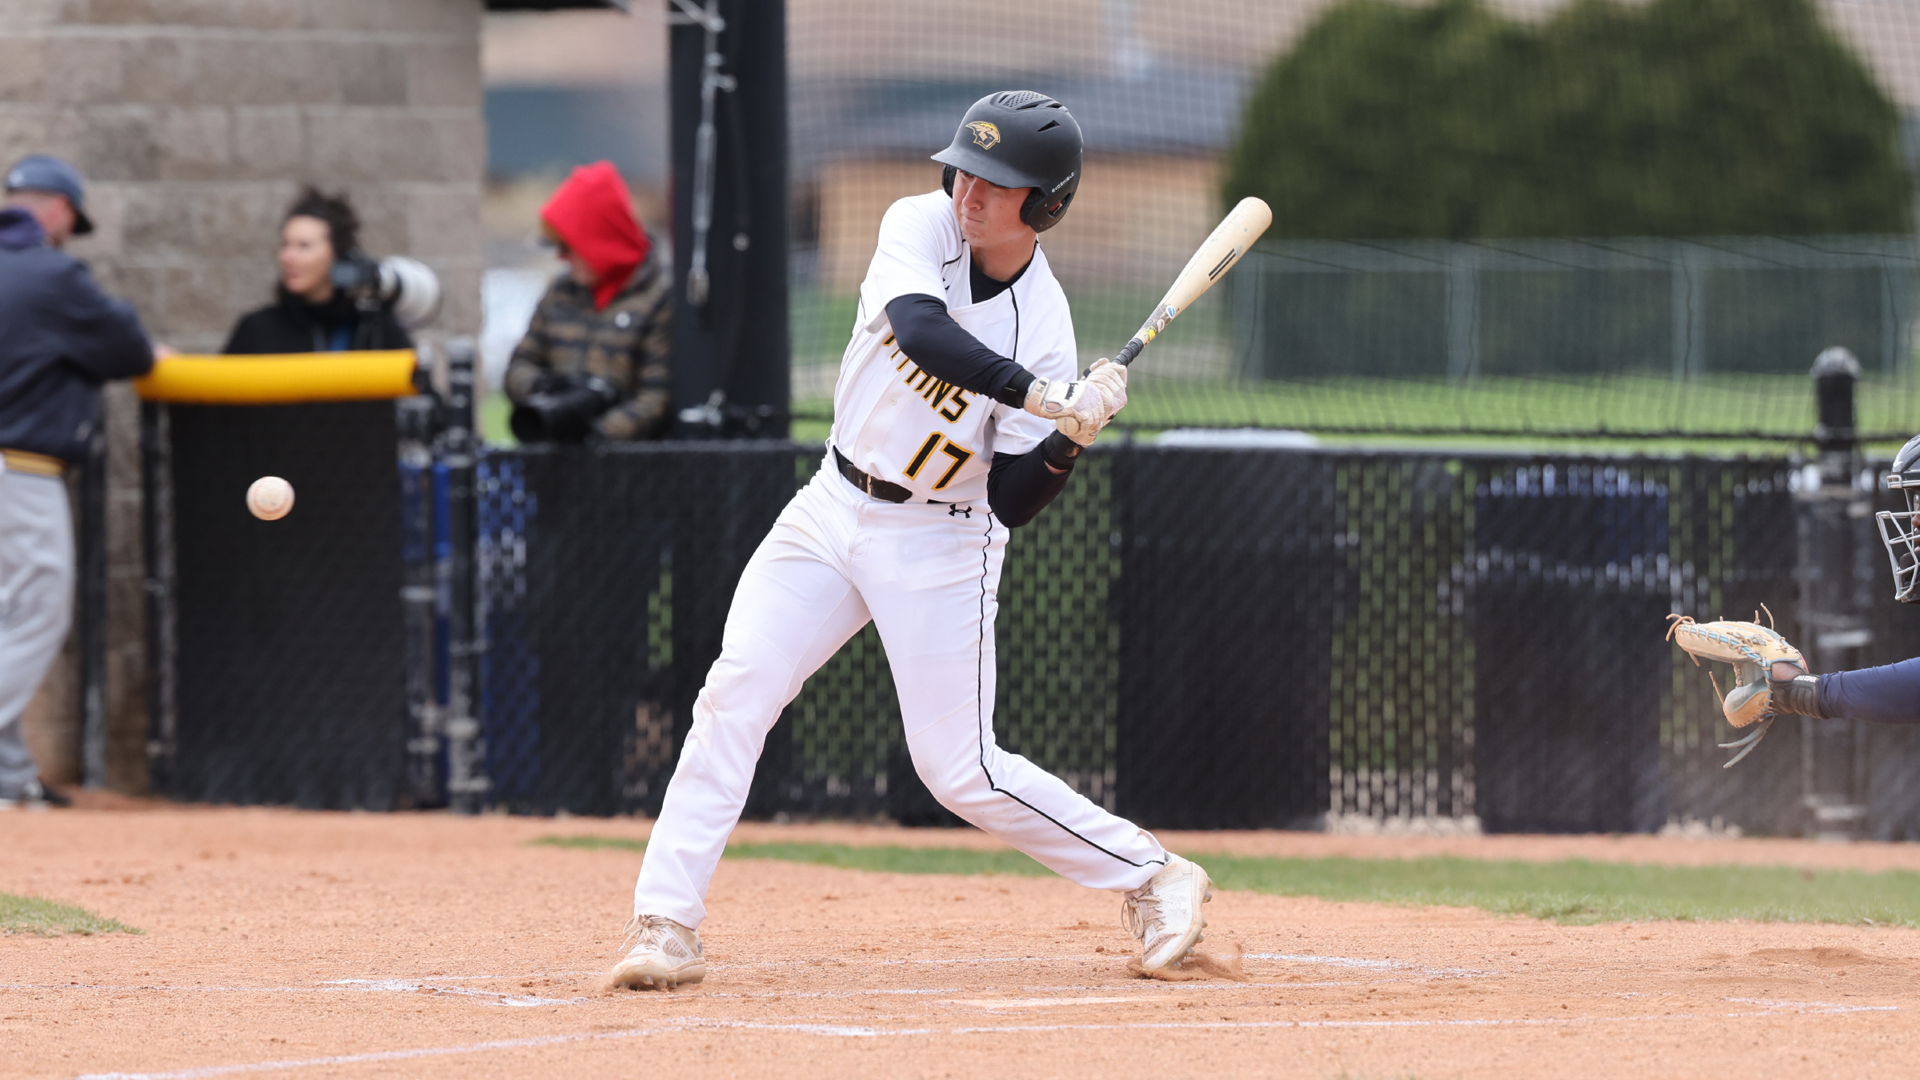 Brenden Max went 4-for-6 with three runs scored against the Firebirds on Wednesday. Photo Credit: Steve Frommell, UW-Oshkosh Sports Information